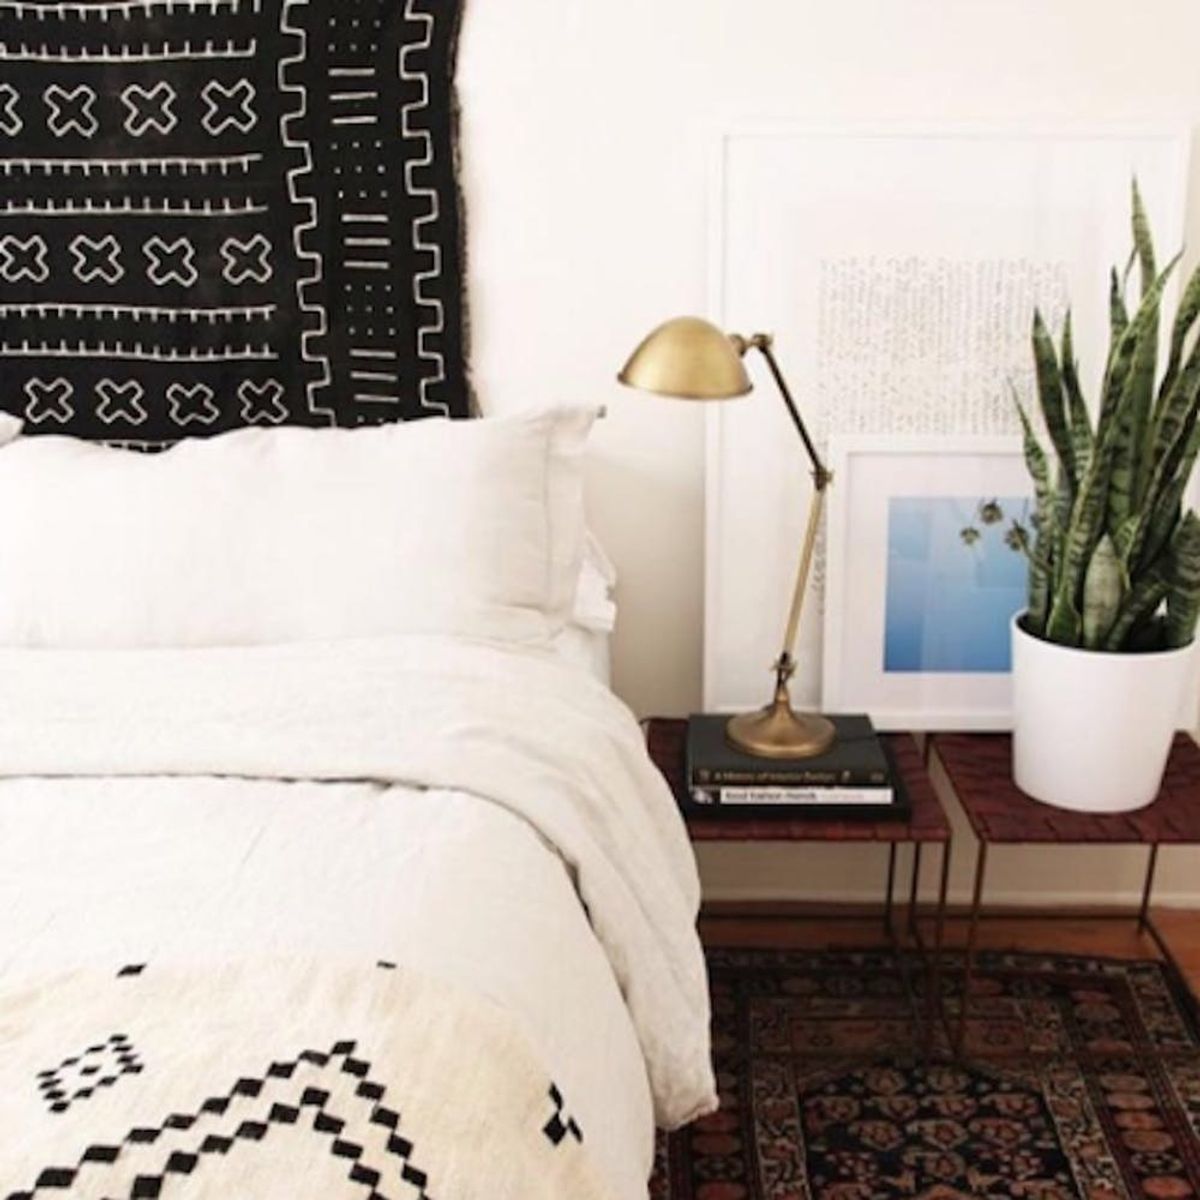 23 Instagrams That Prove Snake Plants Are the New Fiddle Leaf Fig